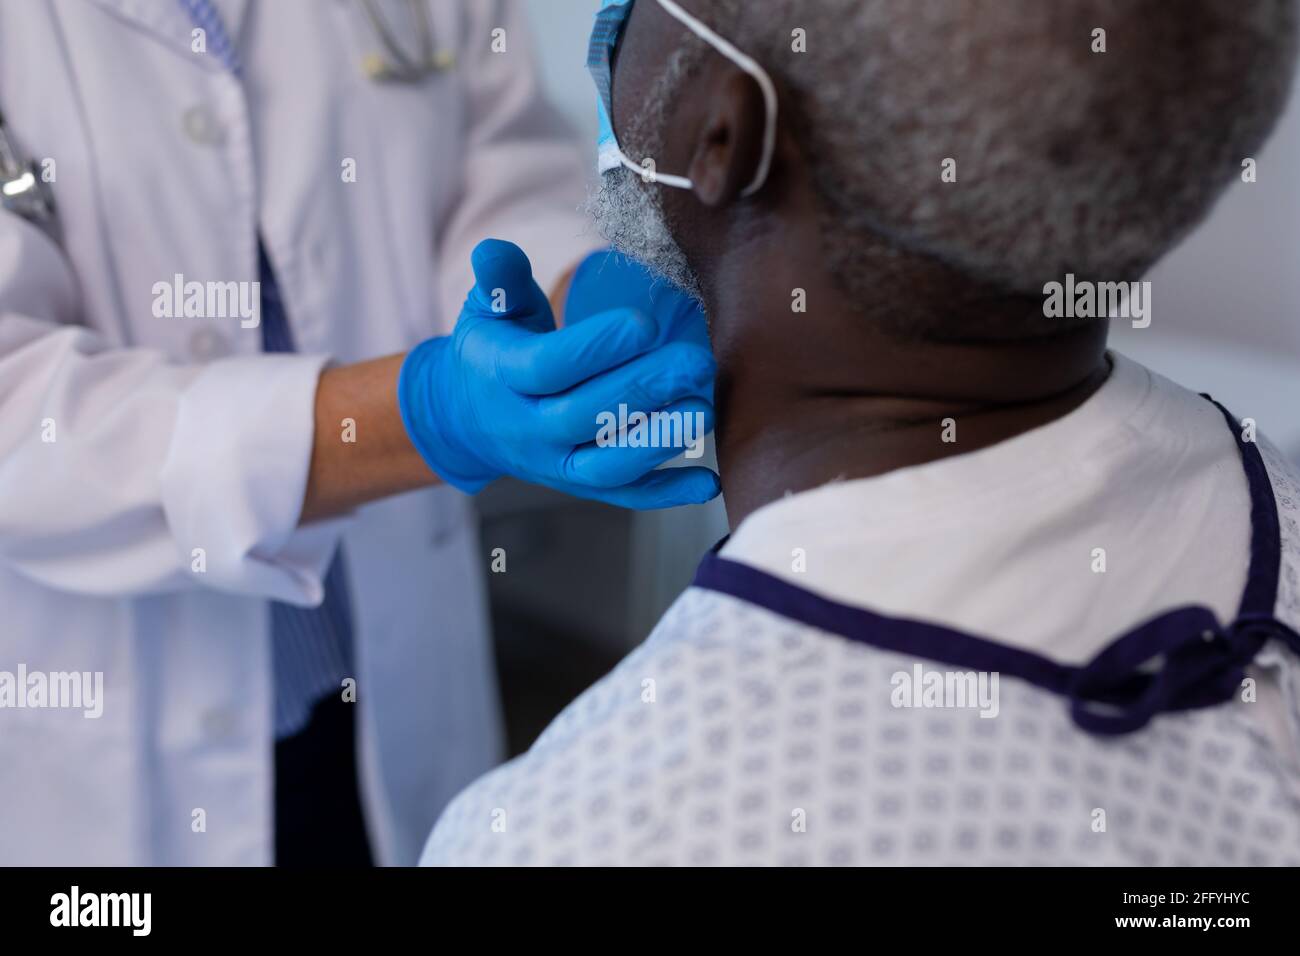 Caucasian female doctor palpating lymph nodes of african american male patient wearing mask Stock Photo